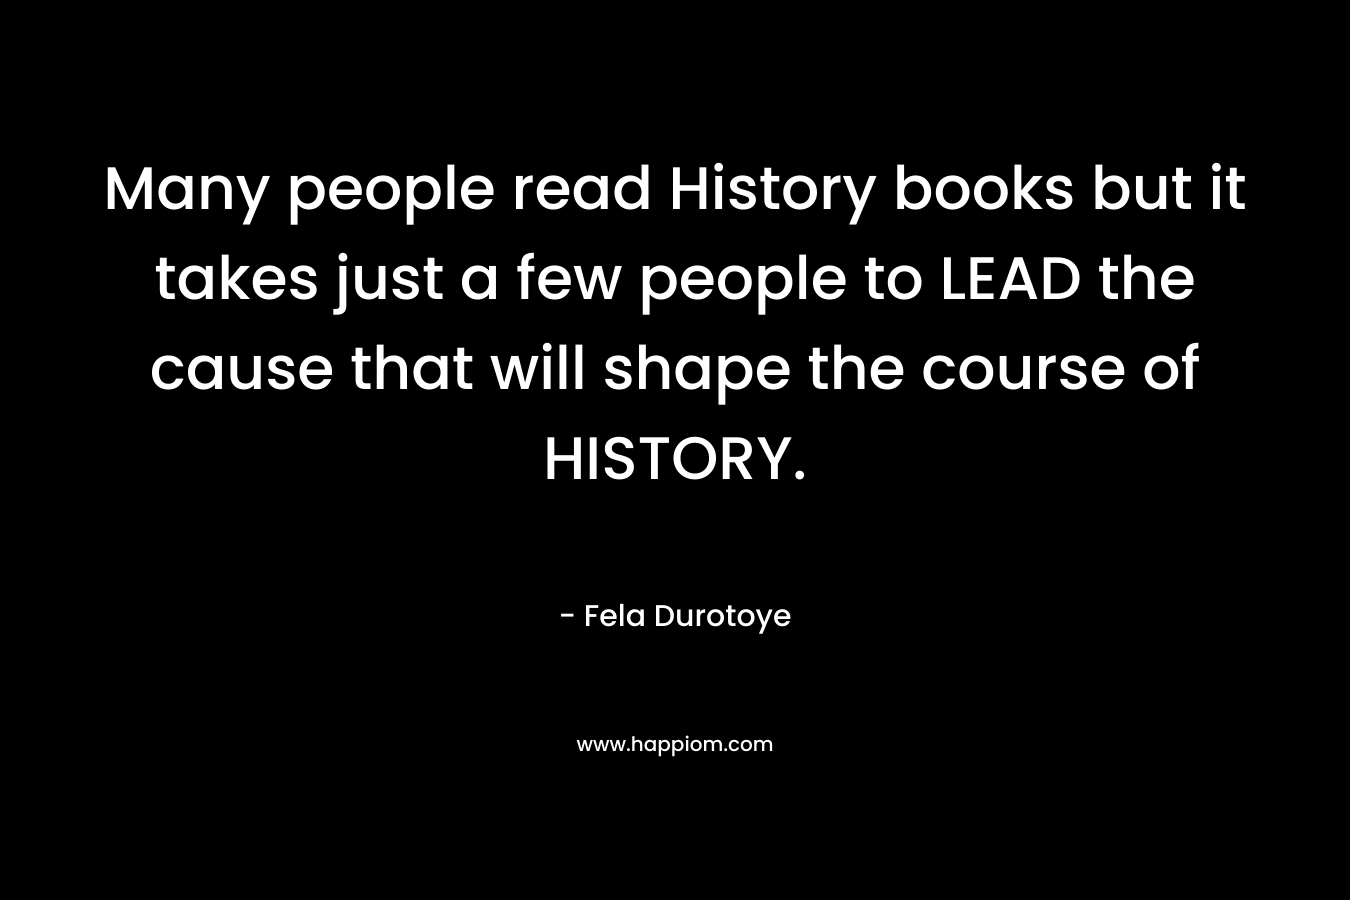 Many people read History books but it takes just a few people to LEAD the cause that will shape the course of HISTORY. – Fela Durotoye